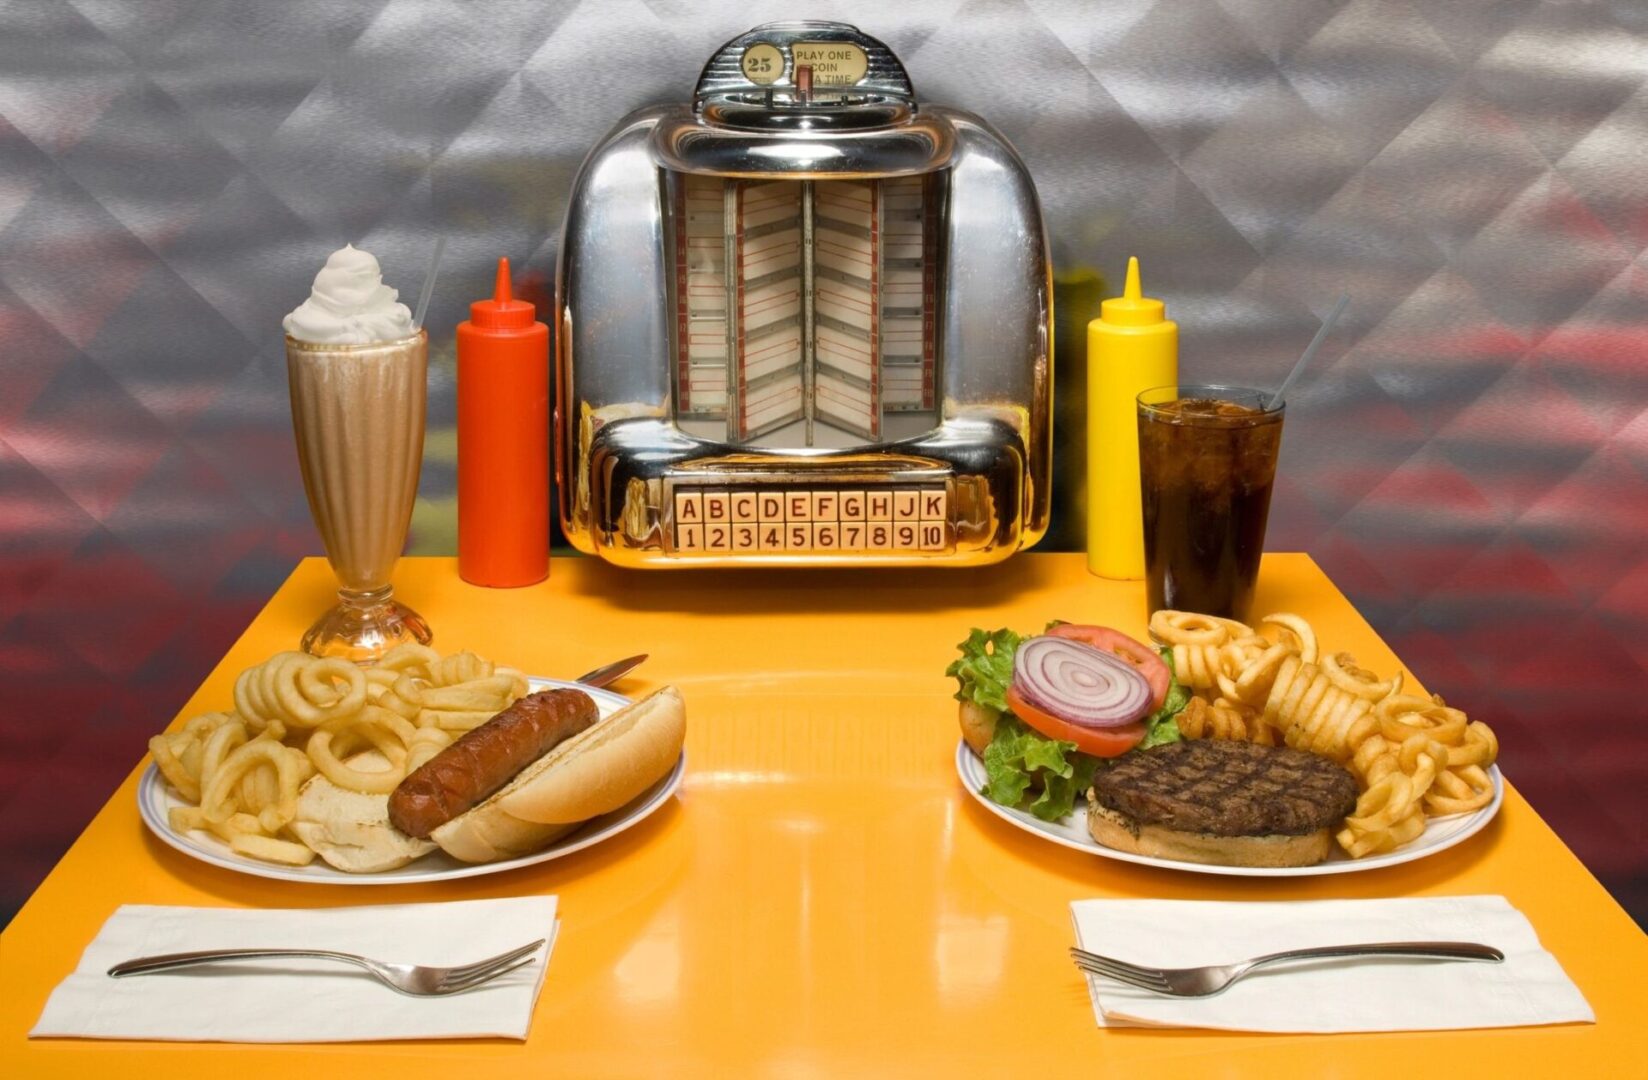 A table with two plates of food and a machine.